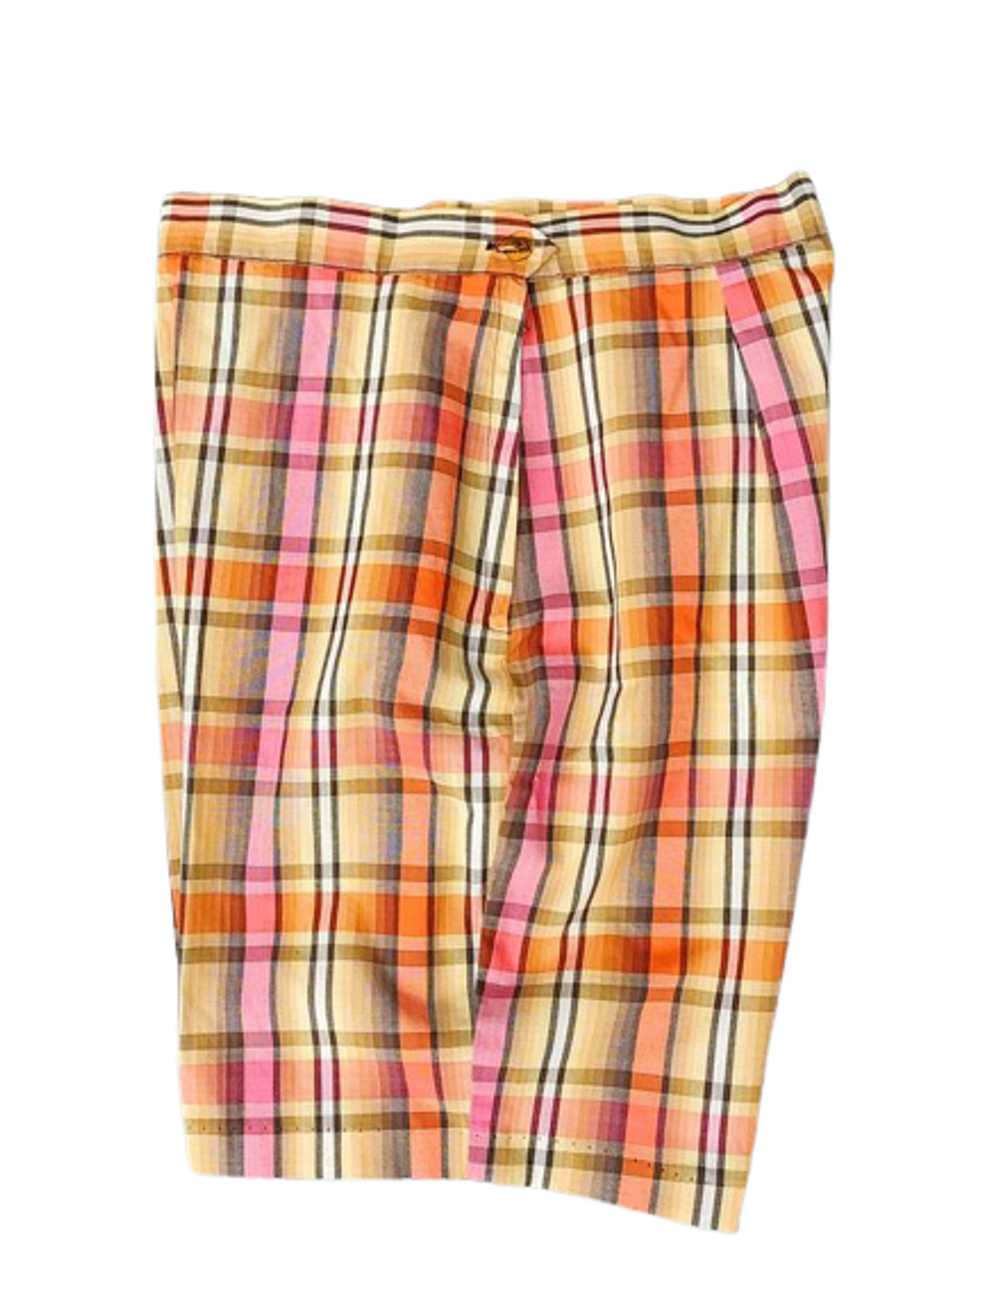 Vintage 1960s Never Worn Plaid Cotton Shorts in B… - image 2